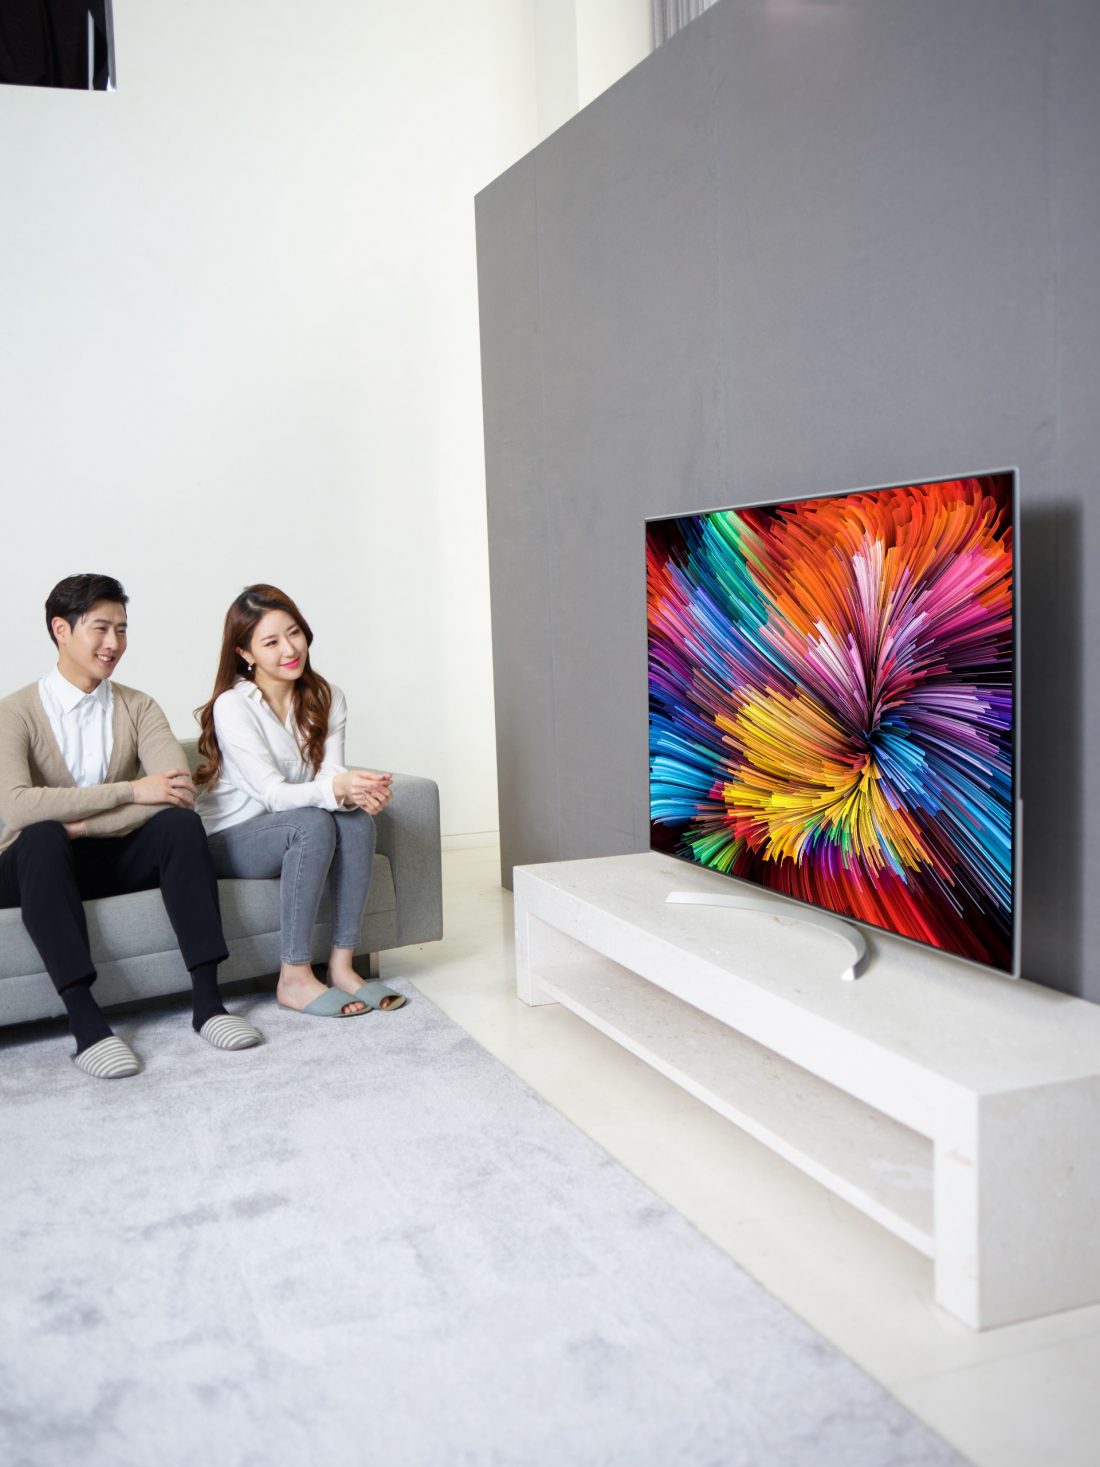 Another different shot of a couple sitting on a couch watching the LG SUPER UHD TV (model SJ95)